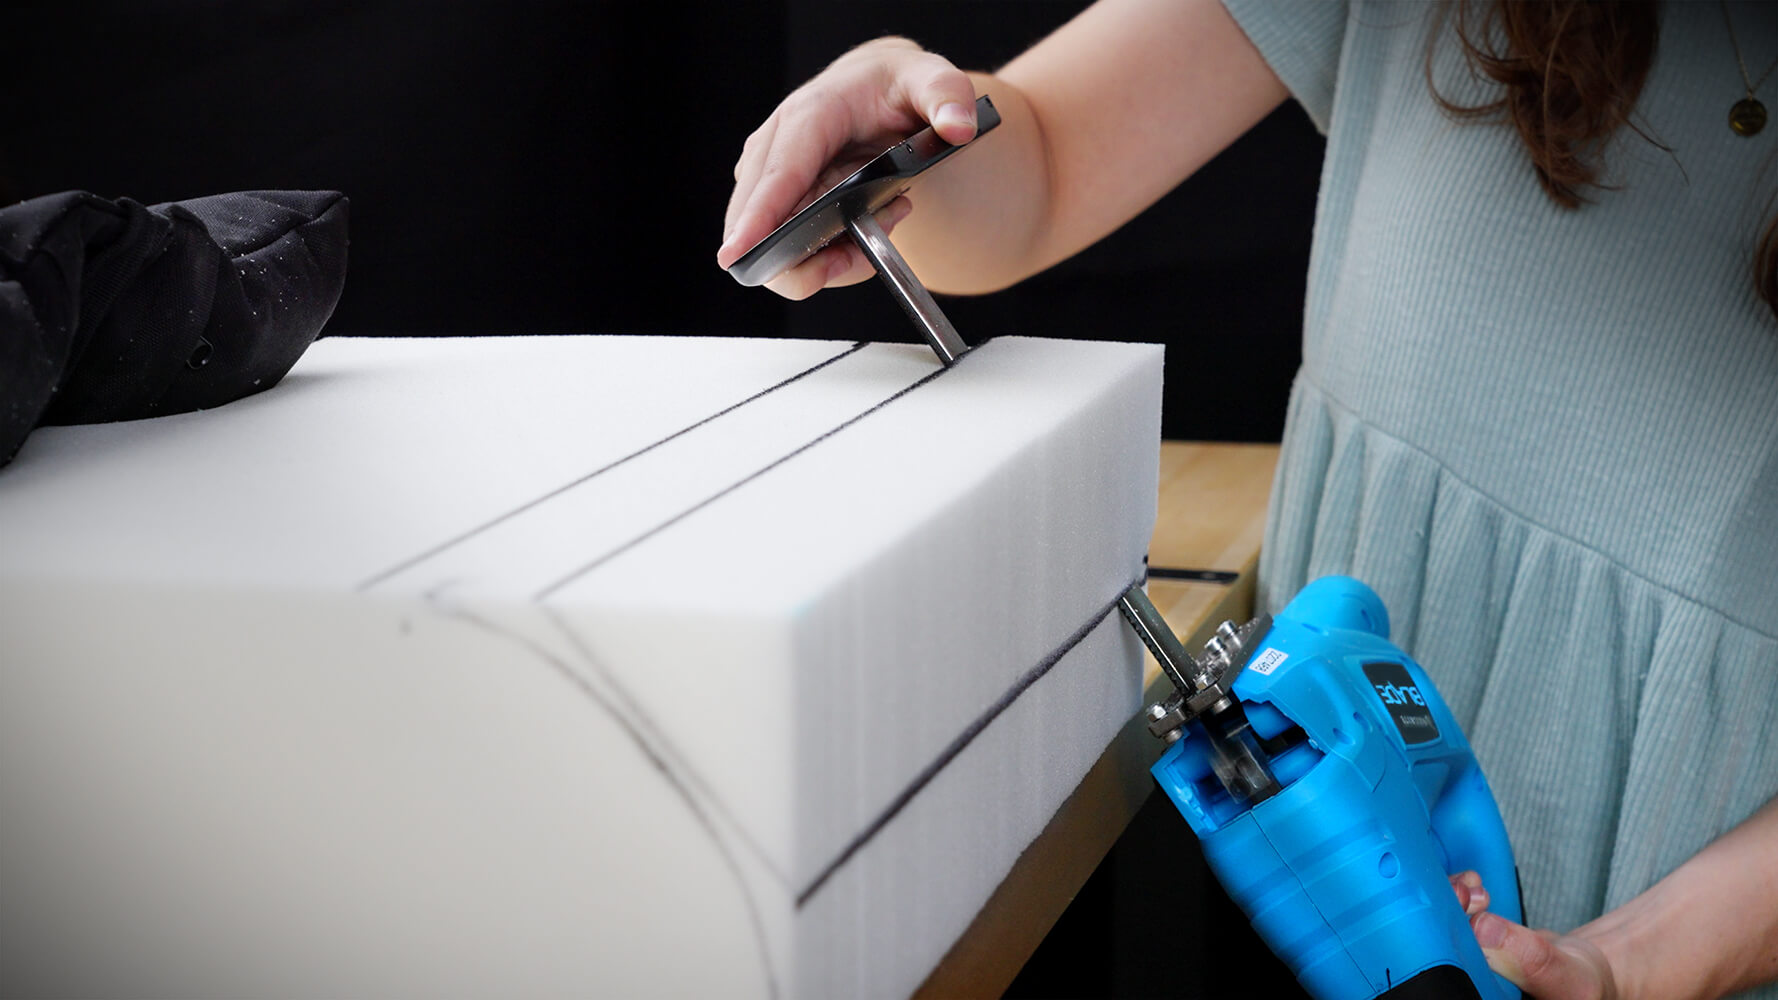 Learn how to shape upholstery foam in our tips and tricks video.